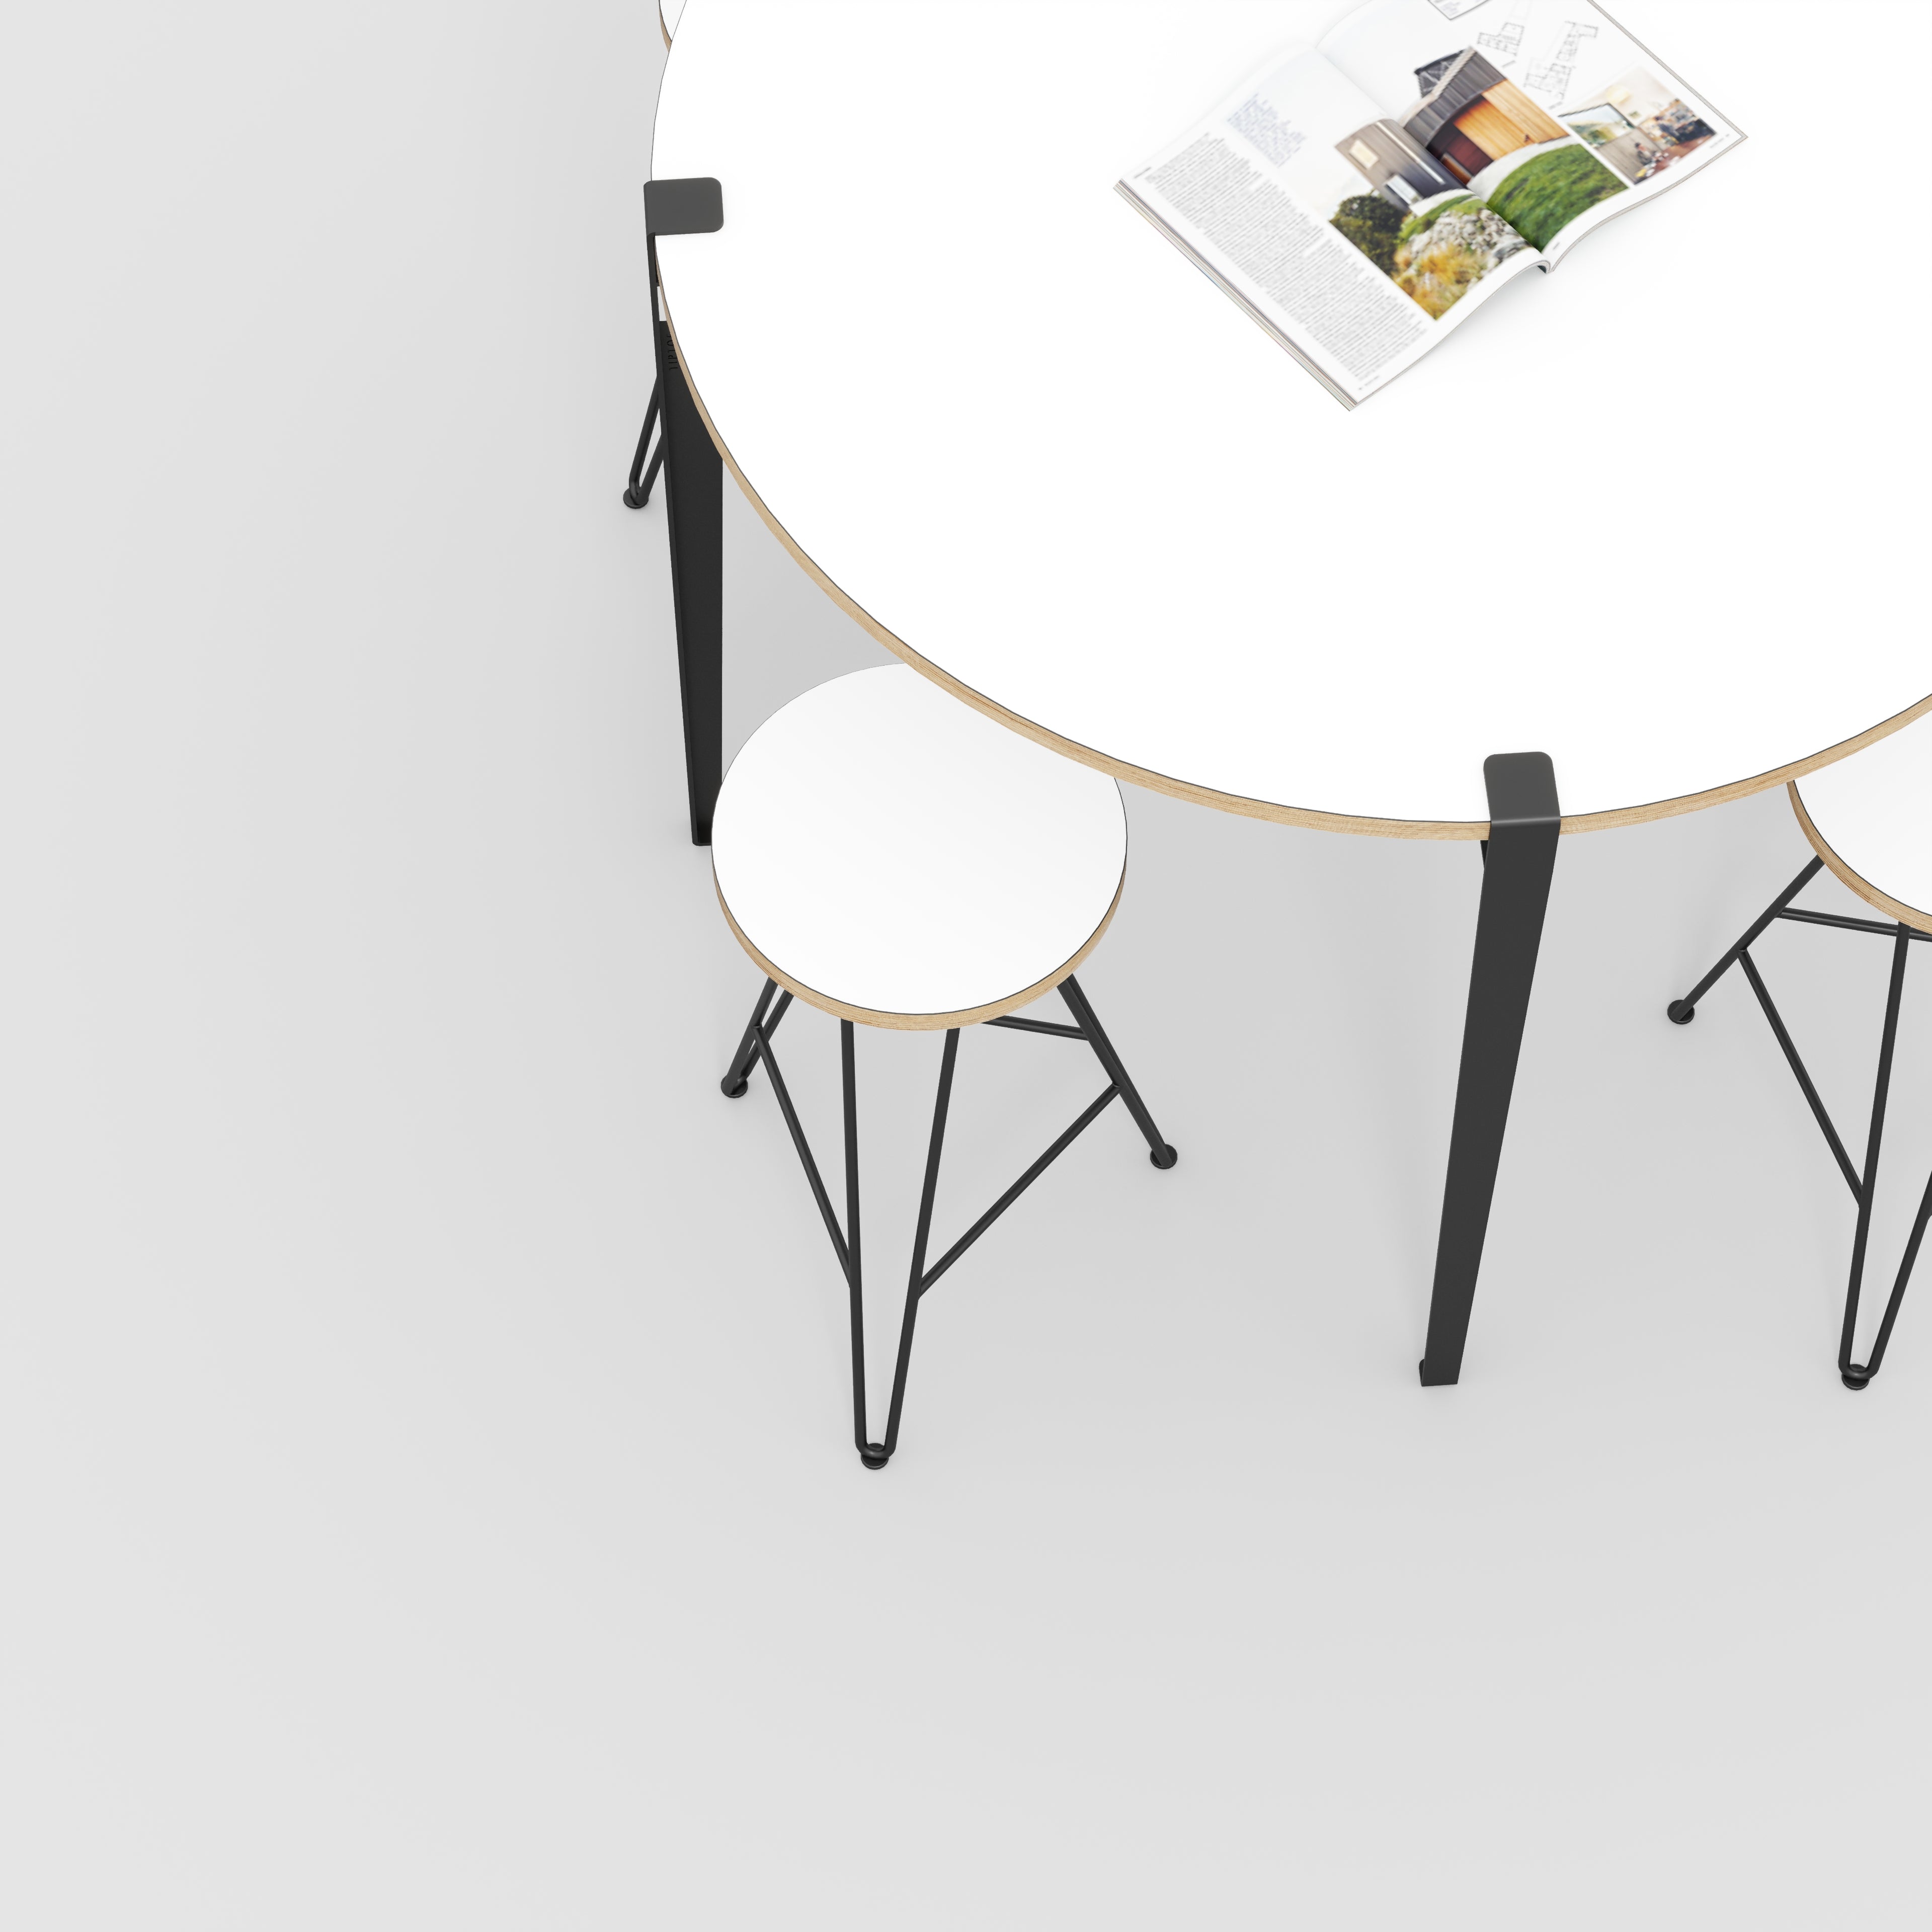 Round Table with Black Tiptoe Legs - Formica White - 1200(dia) x 900(h)